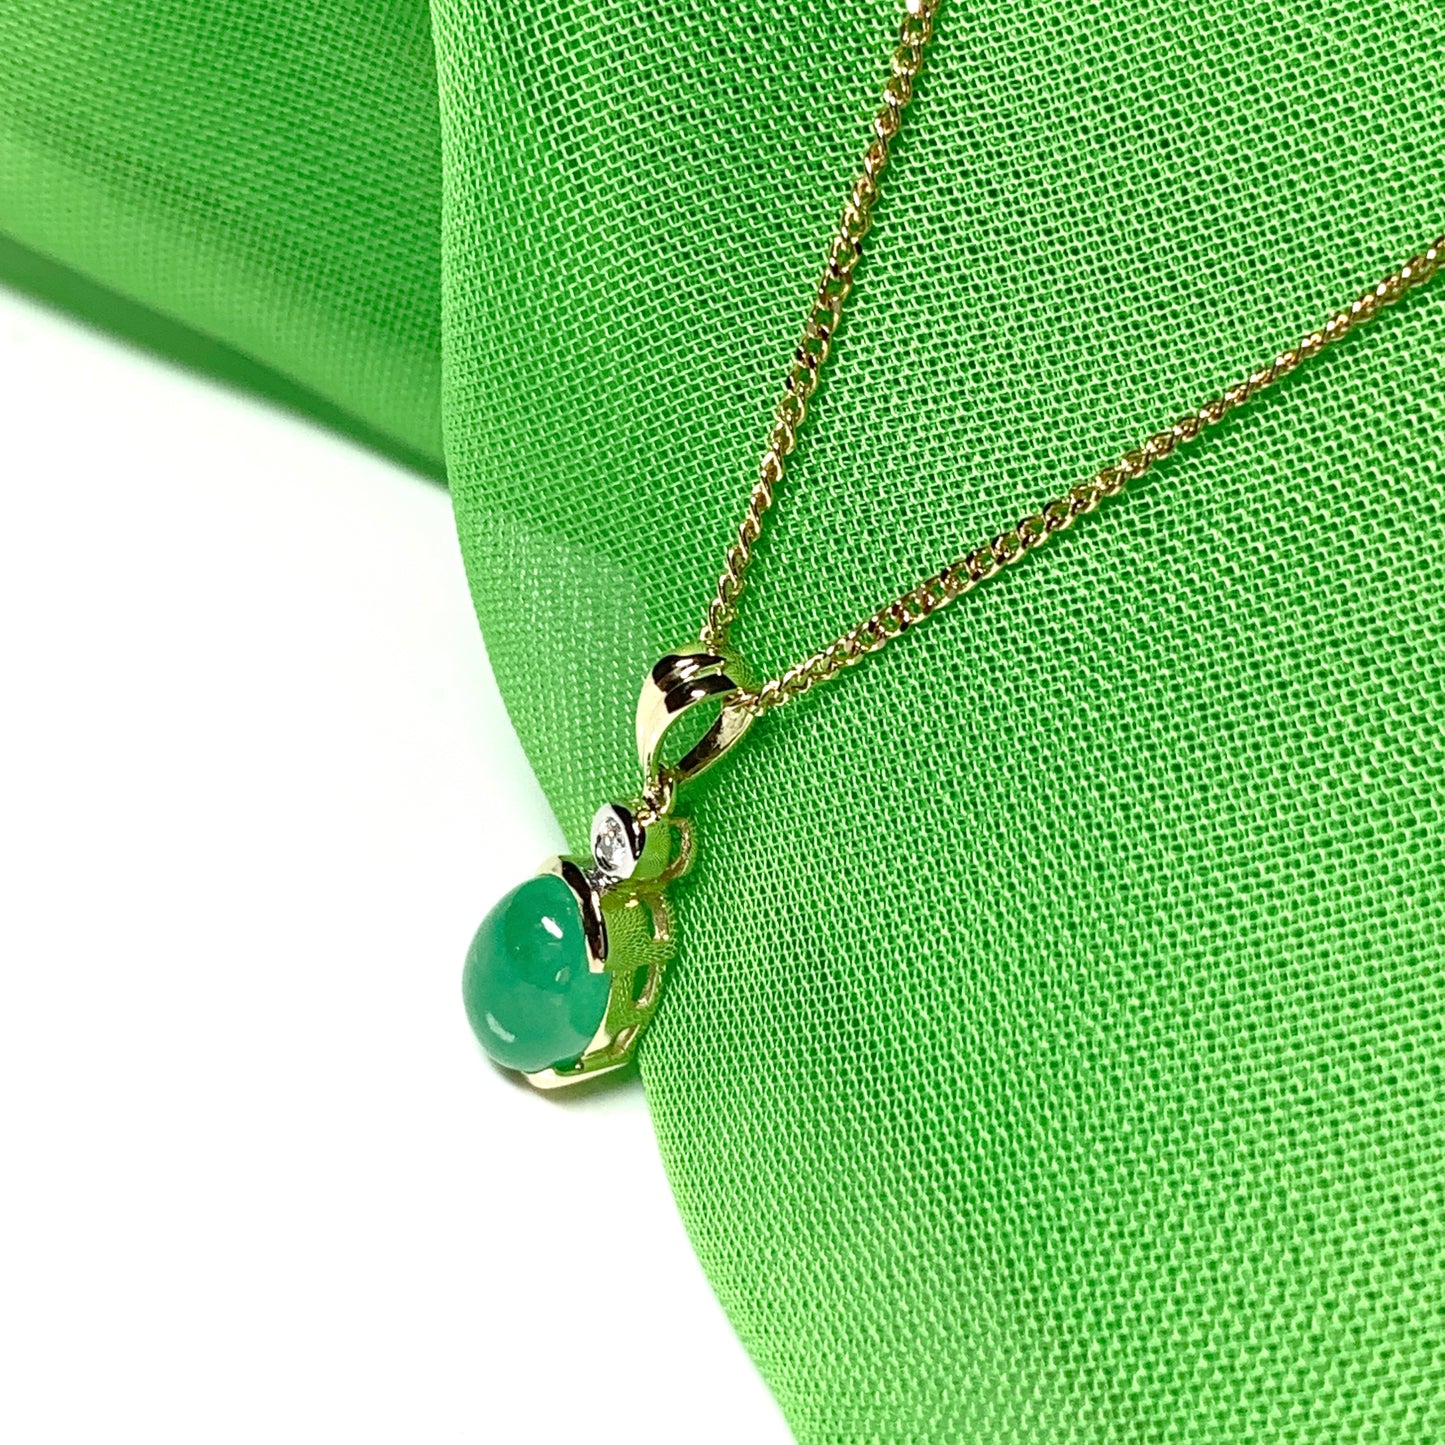 Real green jade and diamond yellow gold necklace